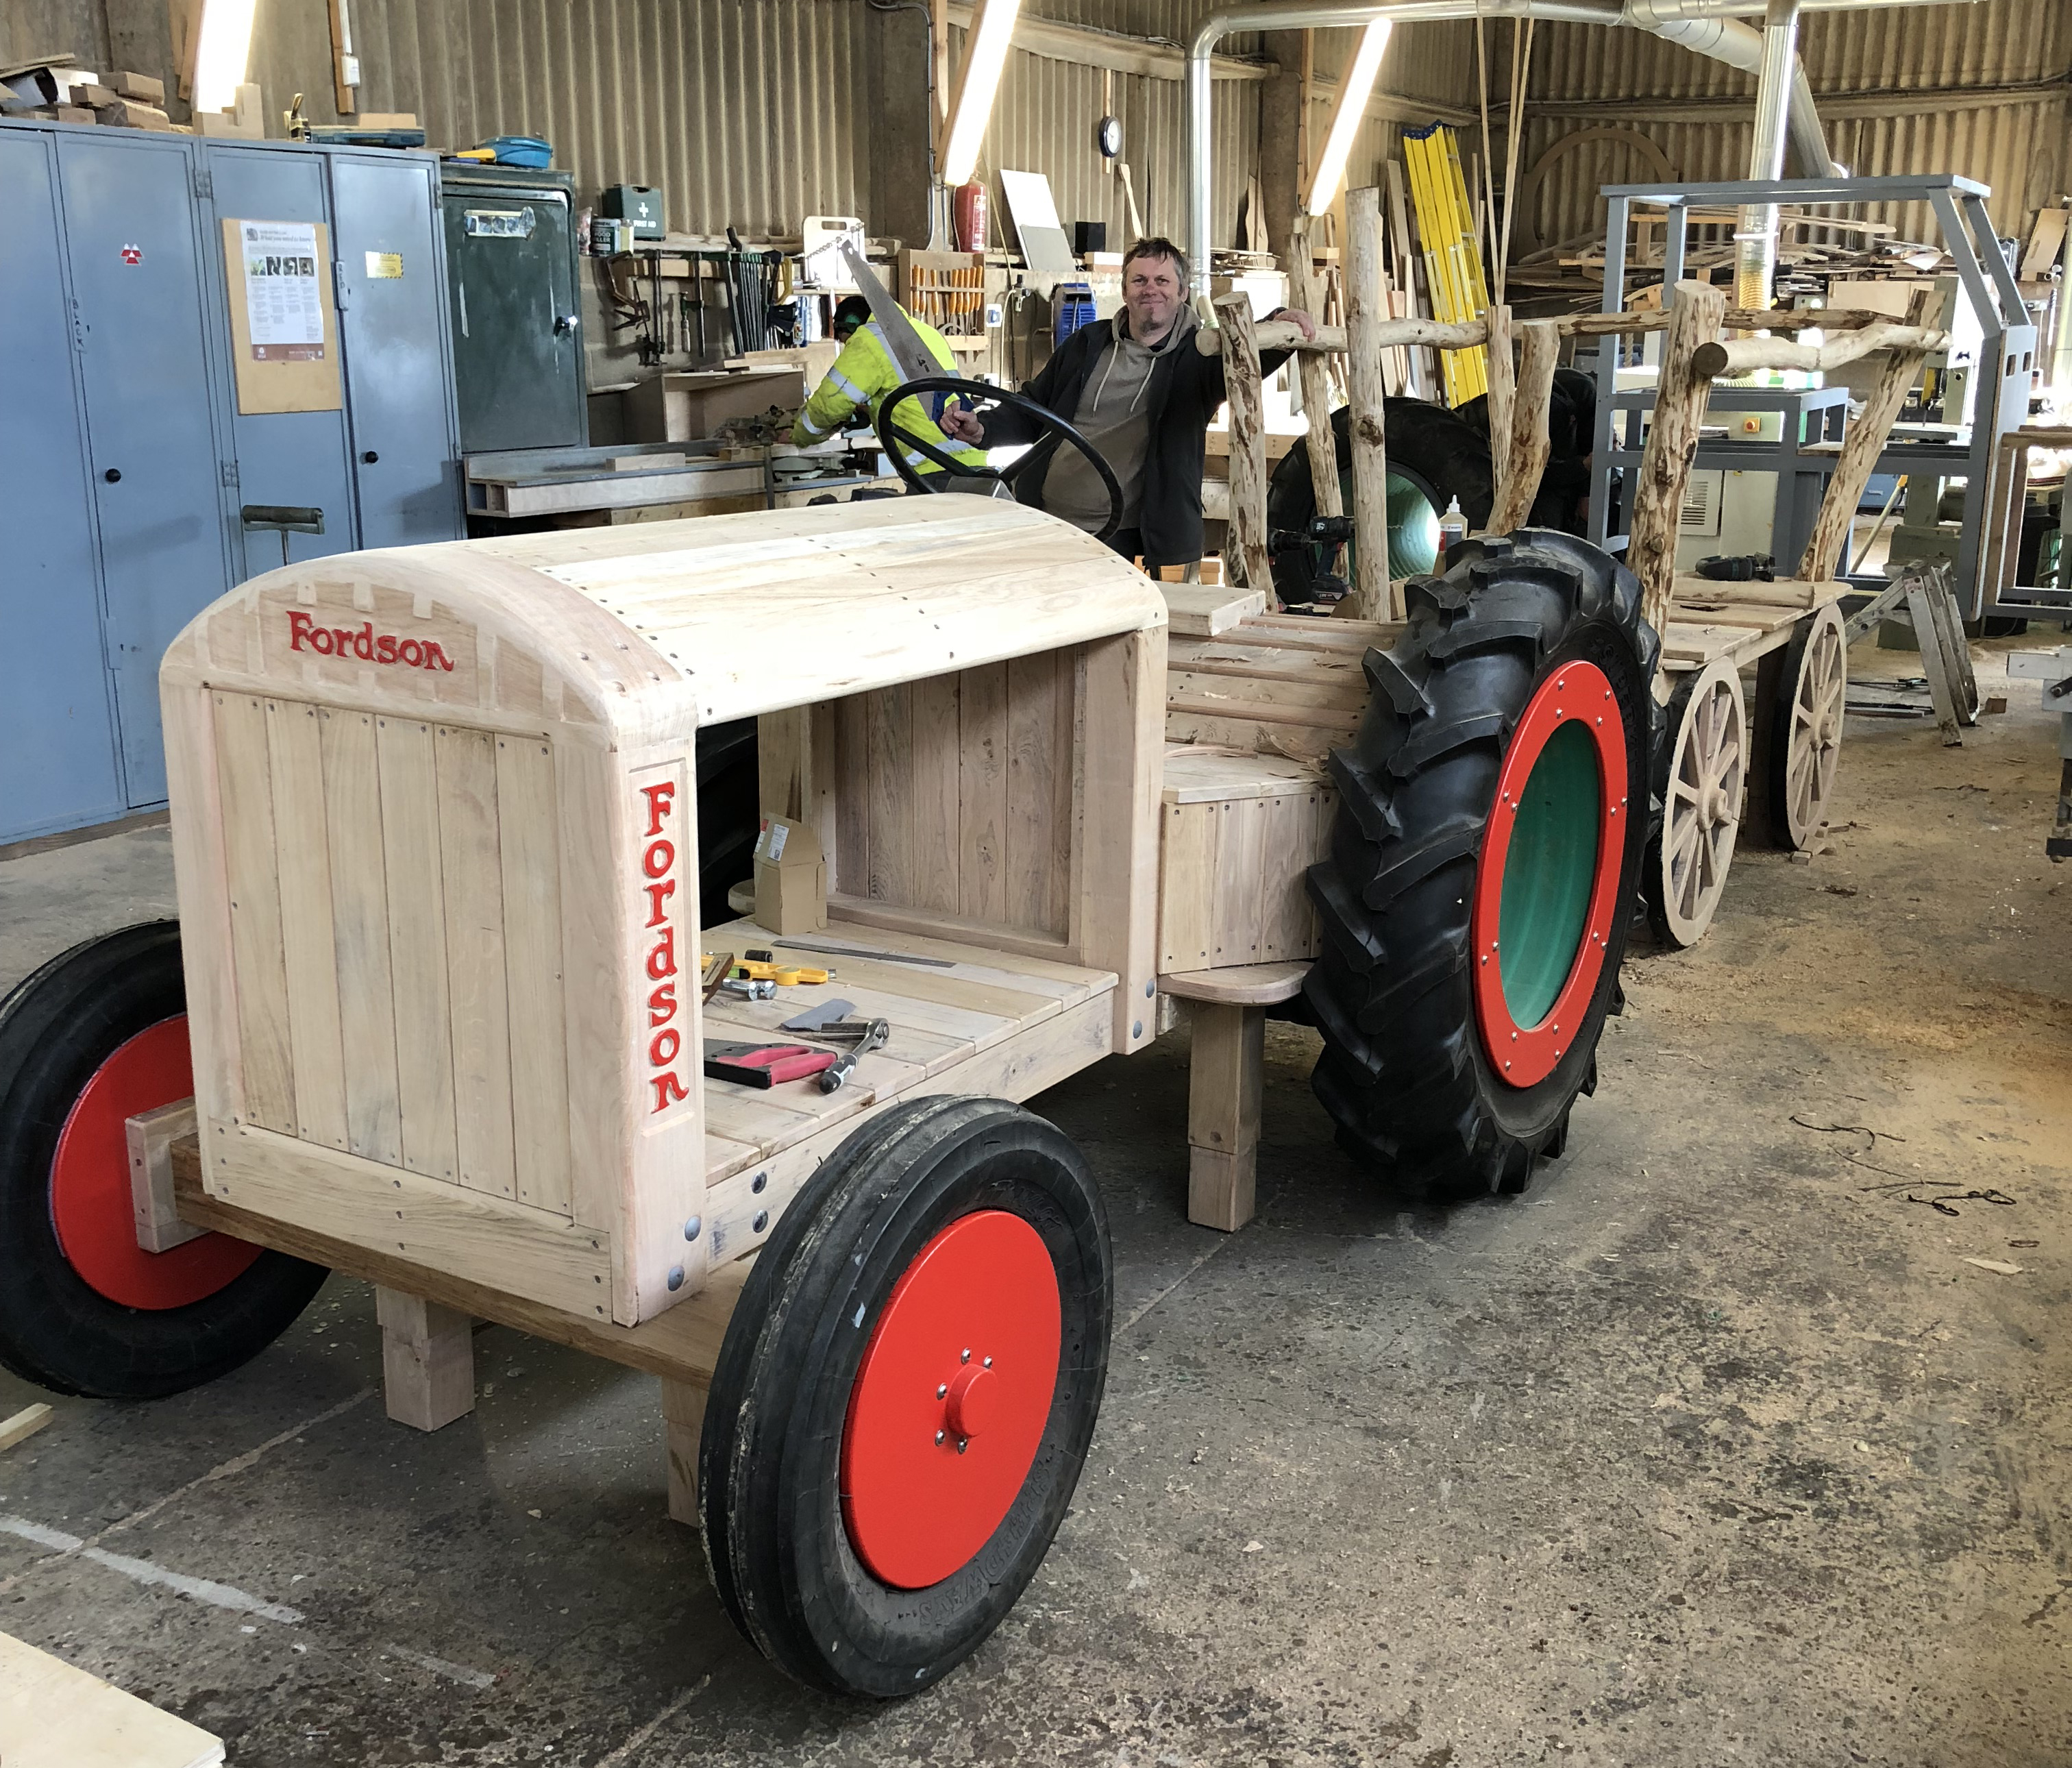 Play tractor under construction in the workshop